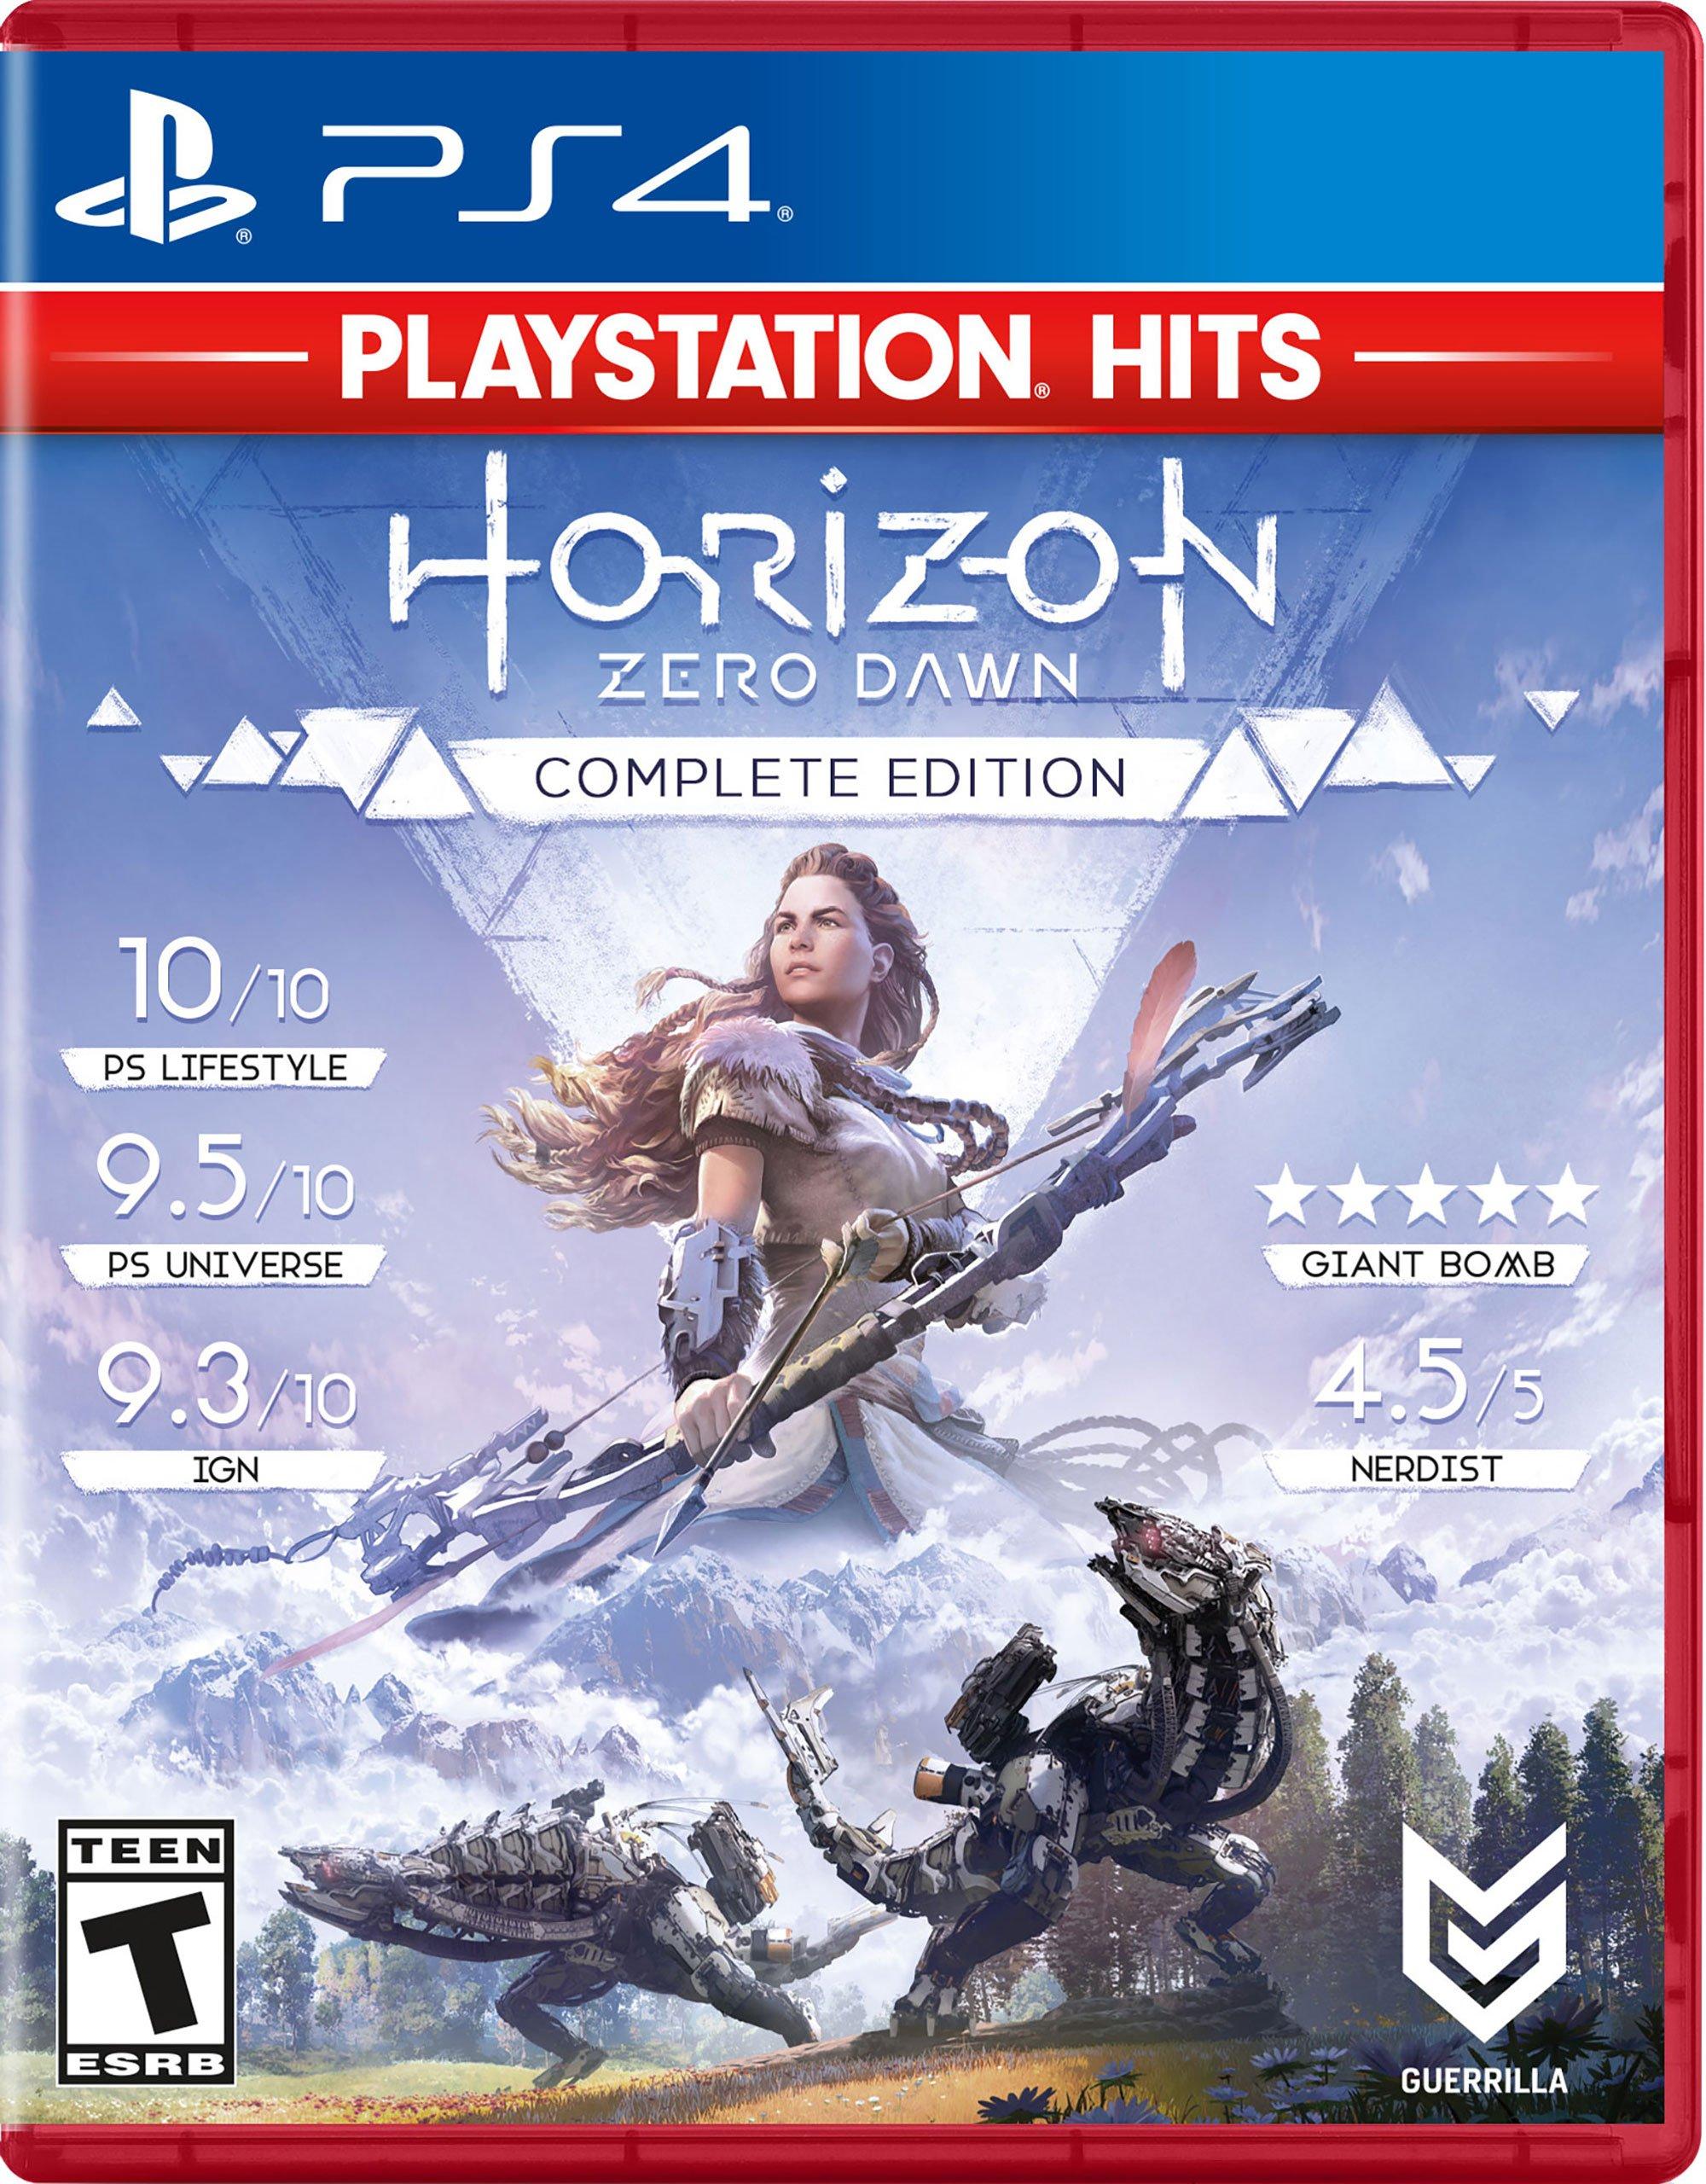 Buy Horizon Zero Dawn: COMPLETE EDITION - PlayStation 4 by Sony for PlaySta...